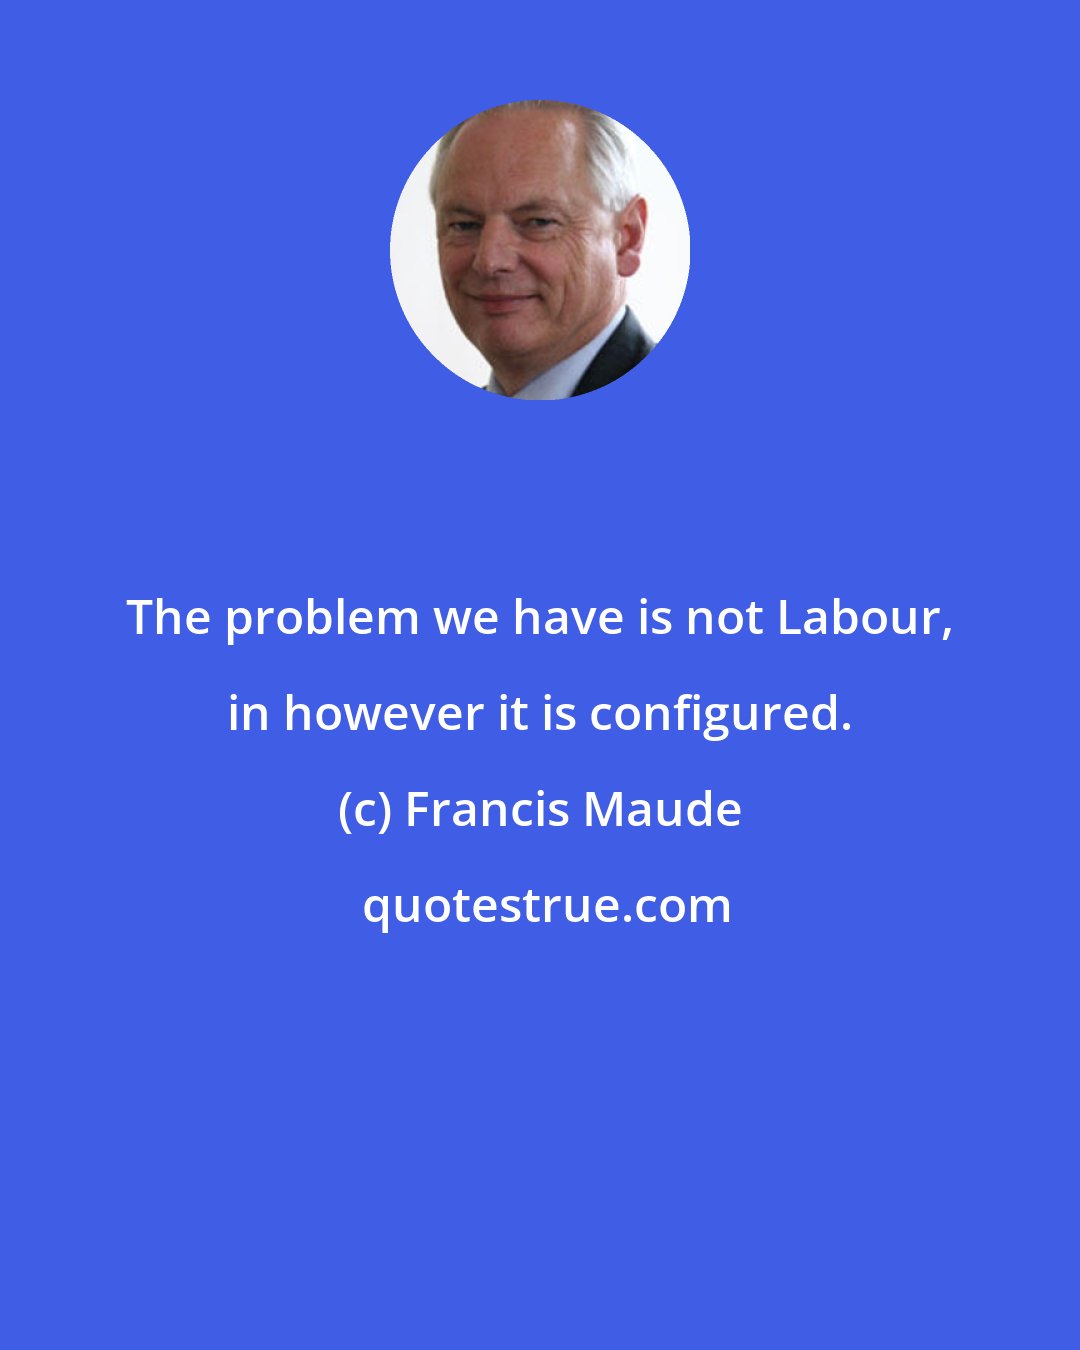 Francis Maude: The problem we have is not Labour, in however it is configured.